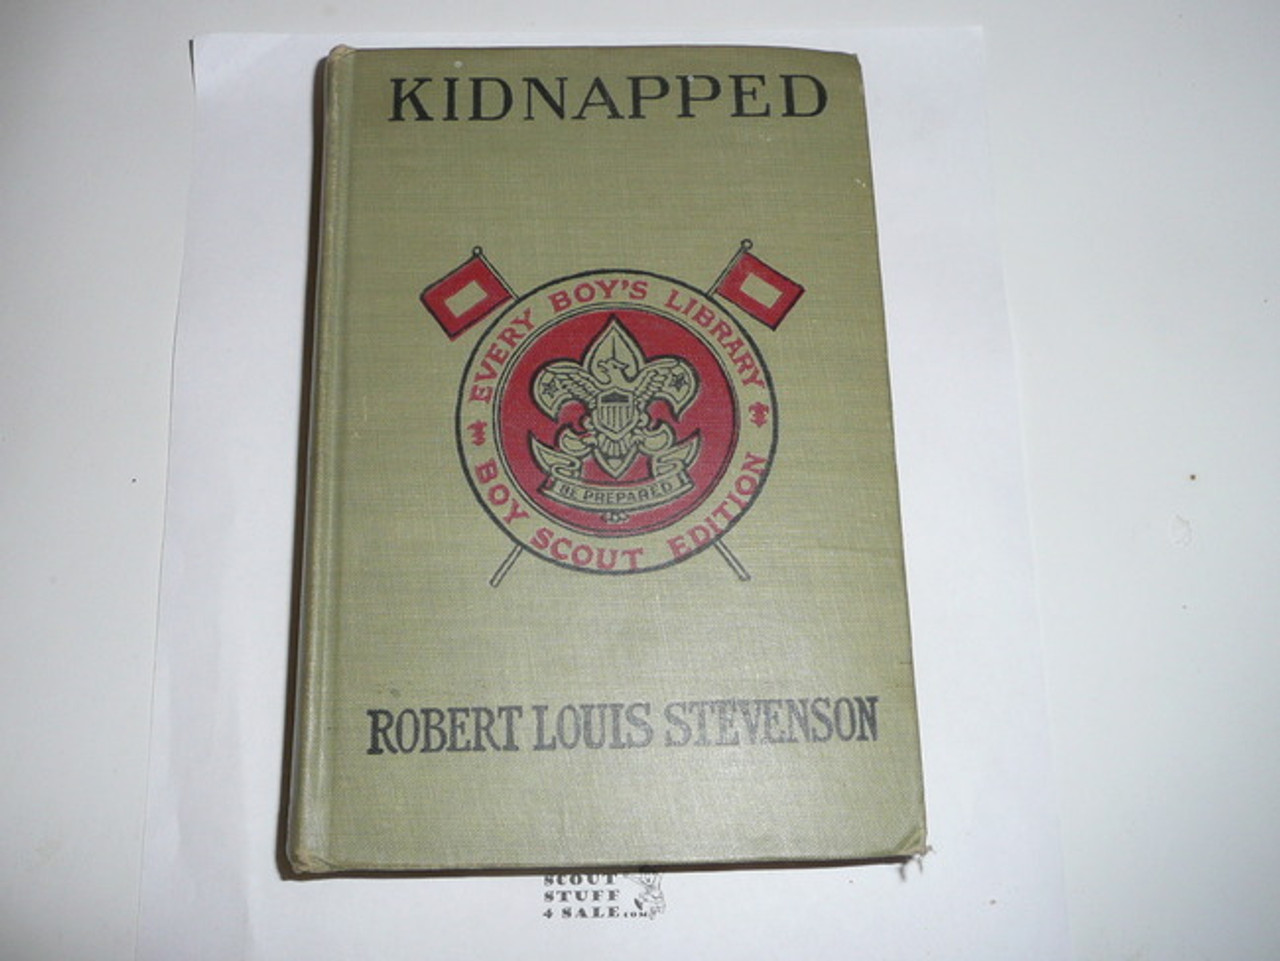 Kidnapped, By Robert Louis Stevenson, 1913, Every Boy's Library Edition, Type Two Binding, in great condition